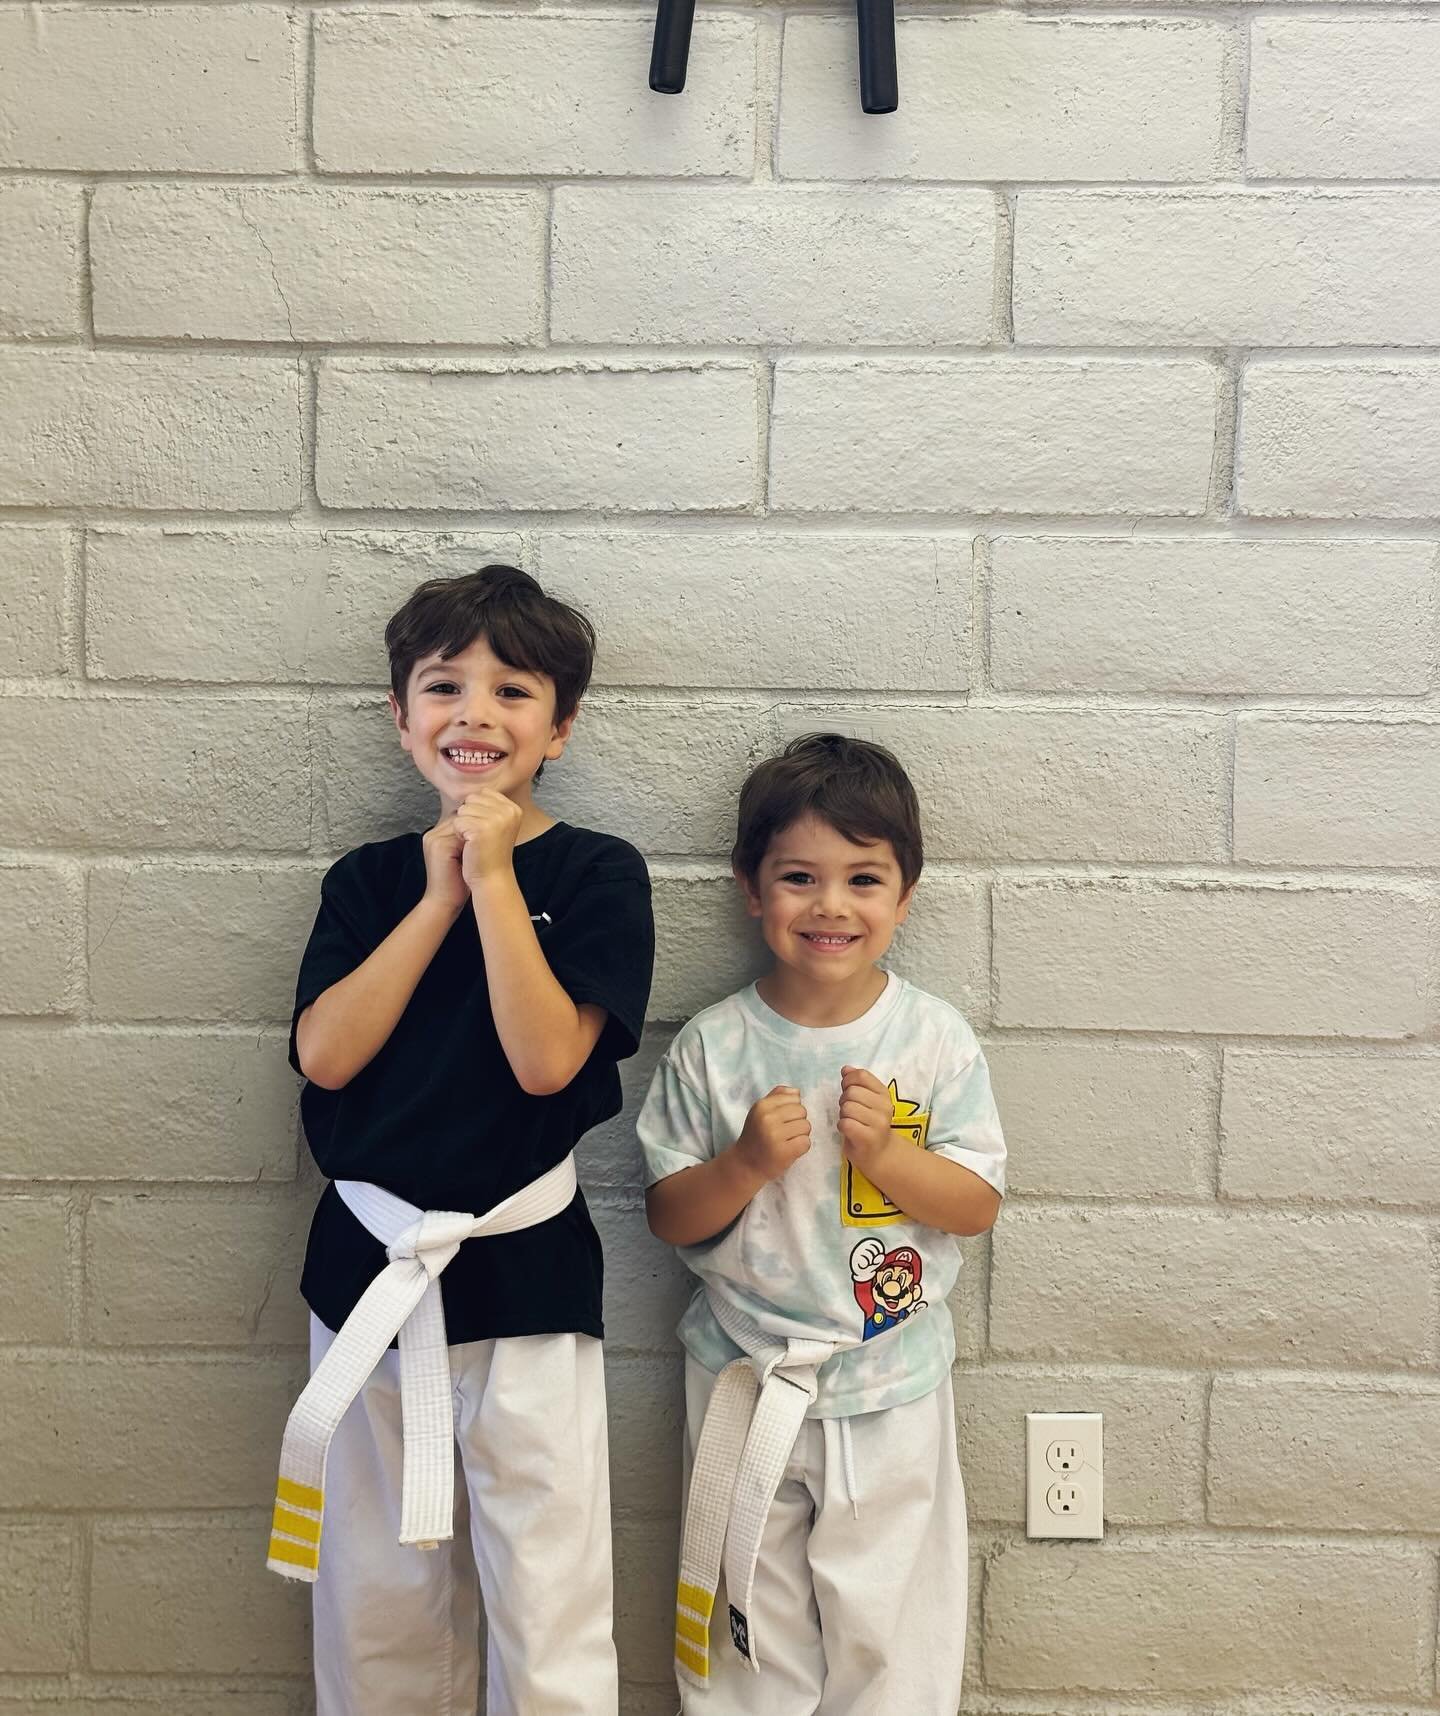 🌟FAMILY MARTIAL ARTS🌟

There&rsquo;s not better way to do martial arts than with your family🤗💙 Please welcome Ezekiel and Zanders! We are so happy to have these two as part of our Premier Martial Arts Academy family💫